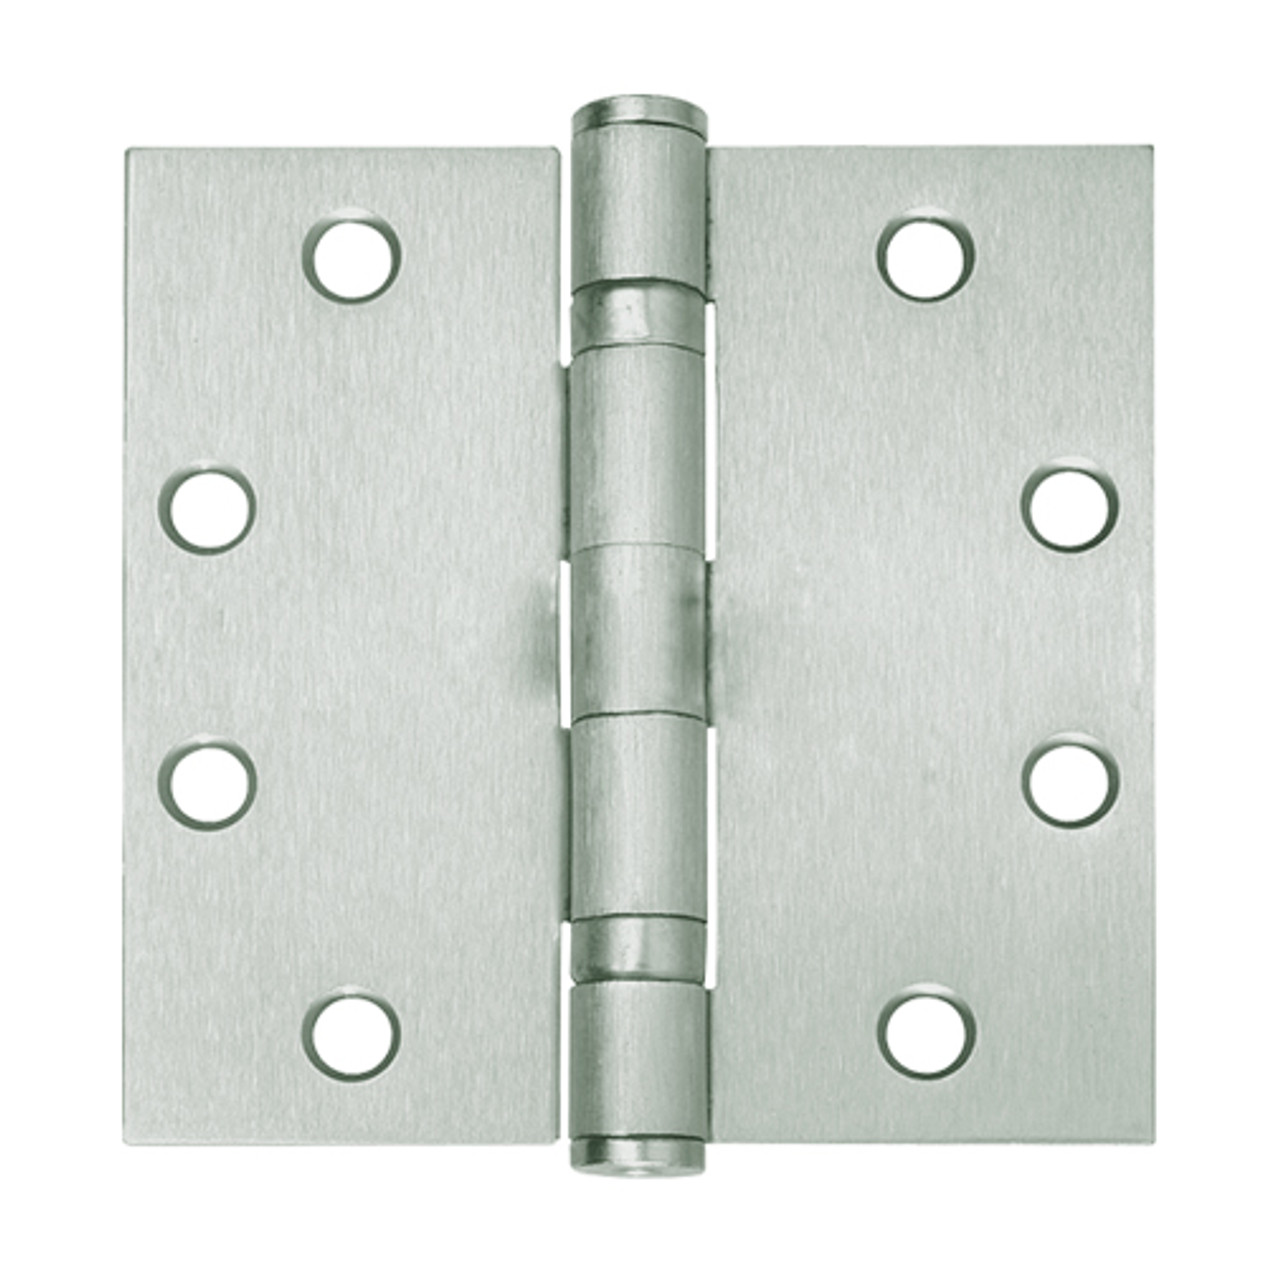 5BB1-4-5x4-5-619-TW8 IVES 5 Knuckle Ball Bearing Full Mortise Hinge with Electric Thru-Wire in Satin Nickel